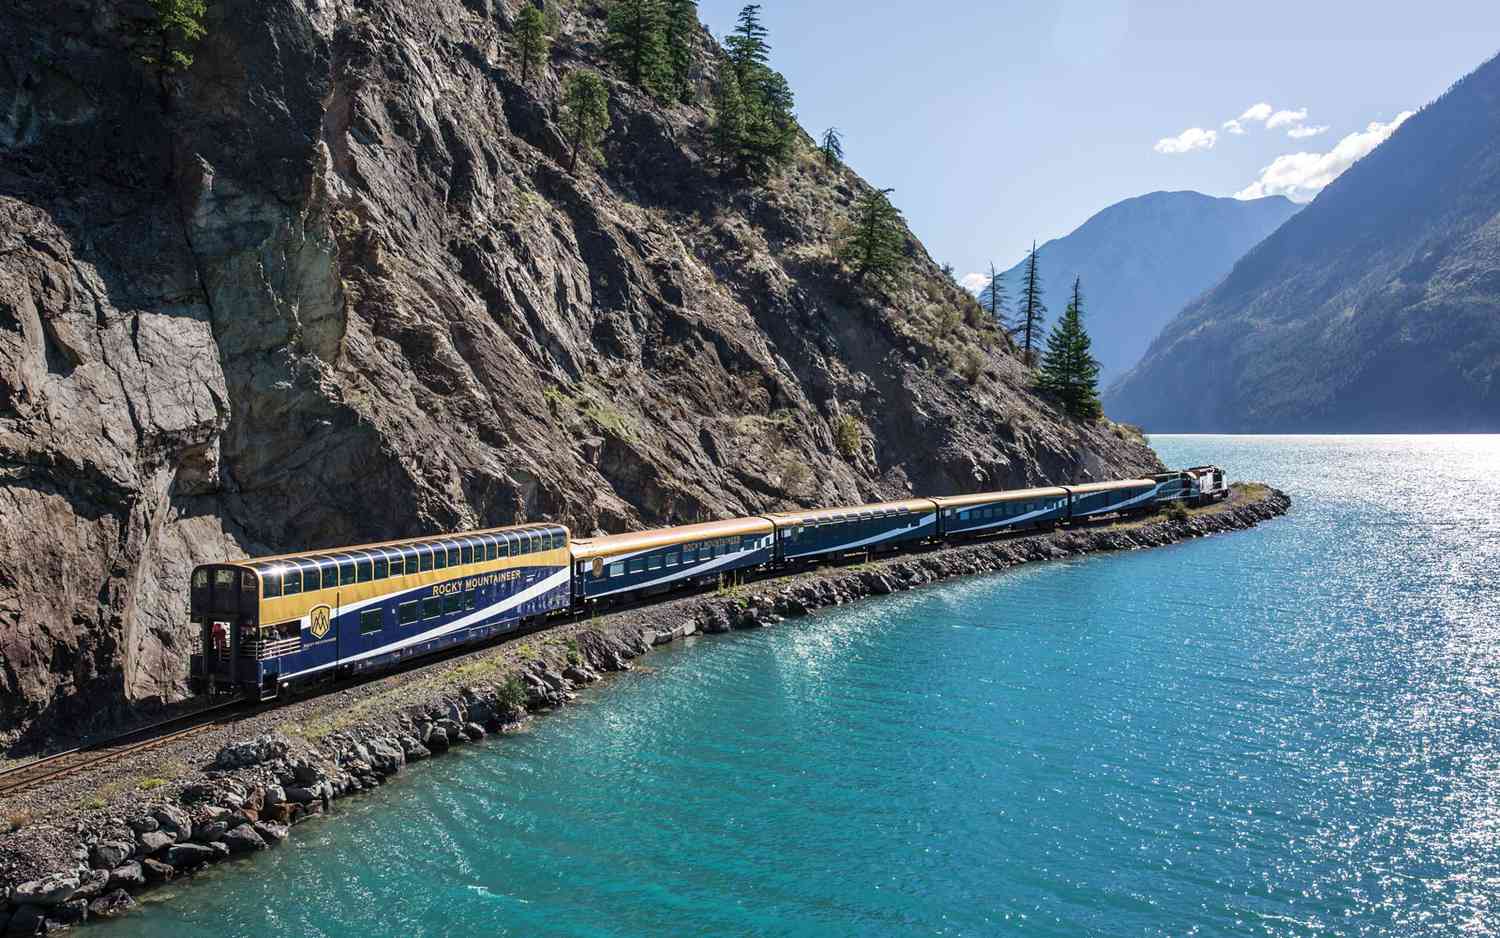 This Glass-domed Train Through the Canadian Rockies Is One of the Most Scenic Rides in the World